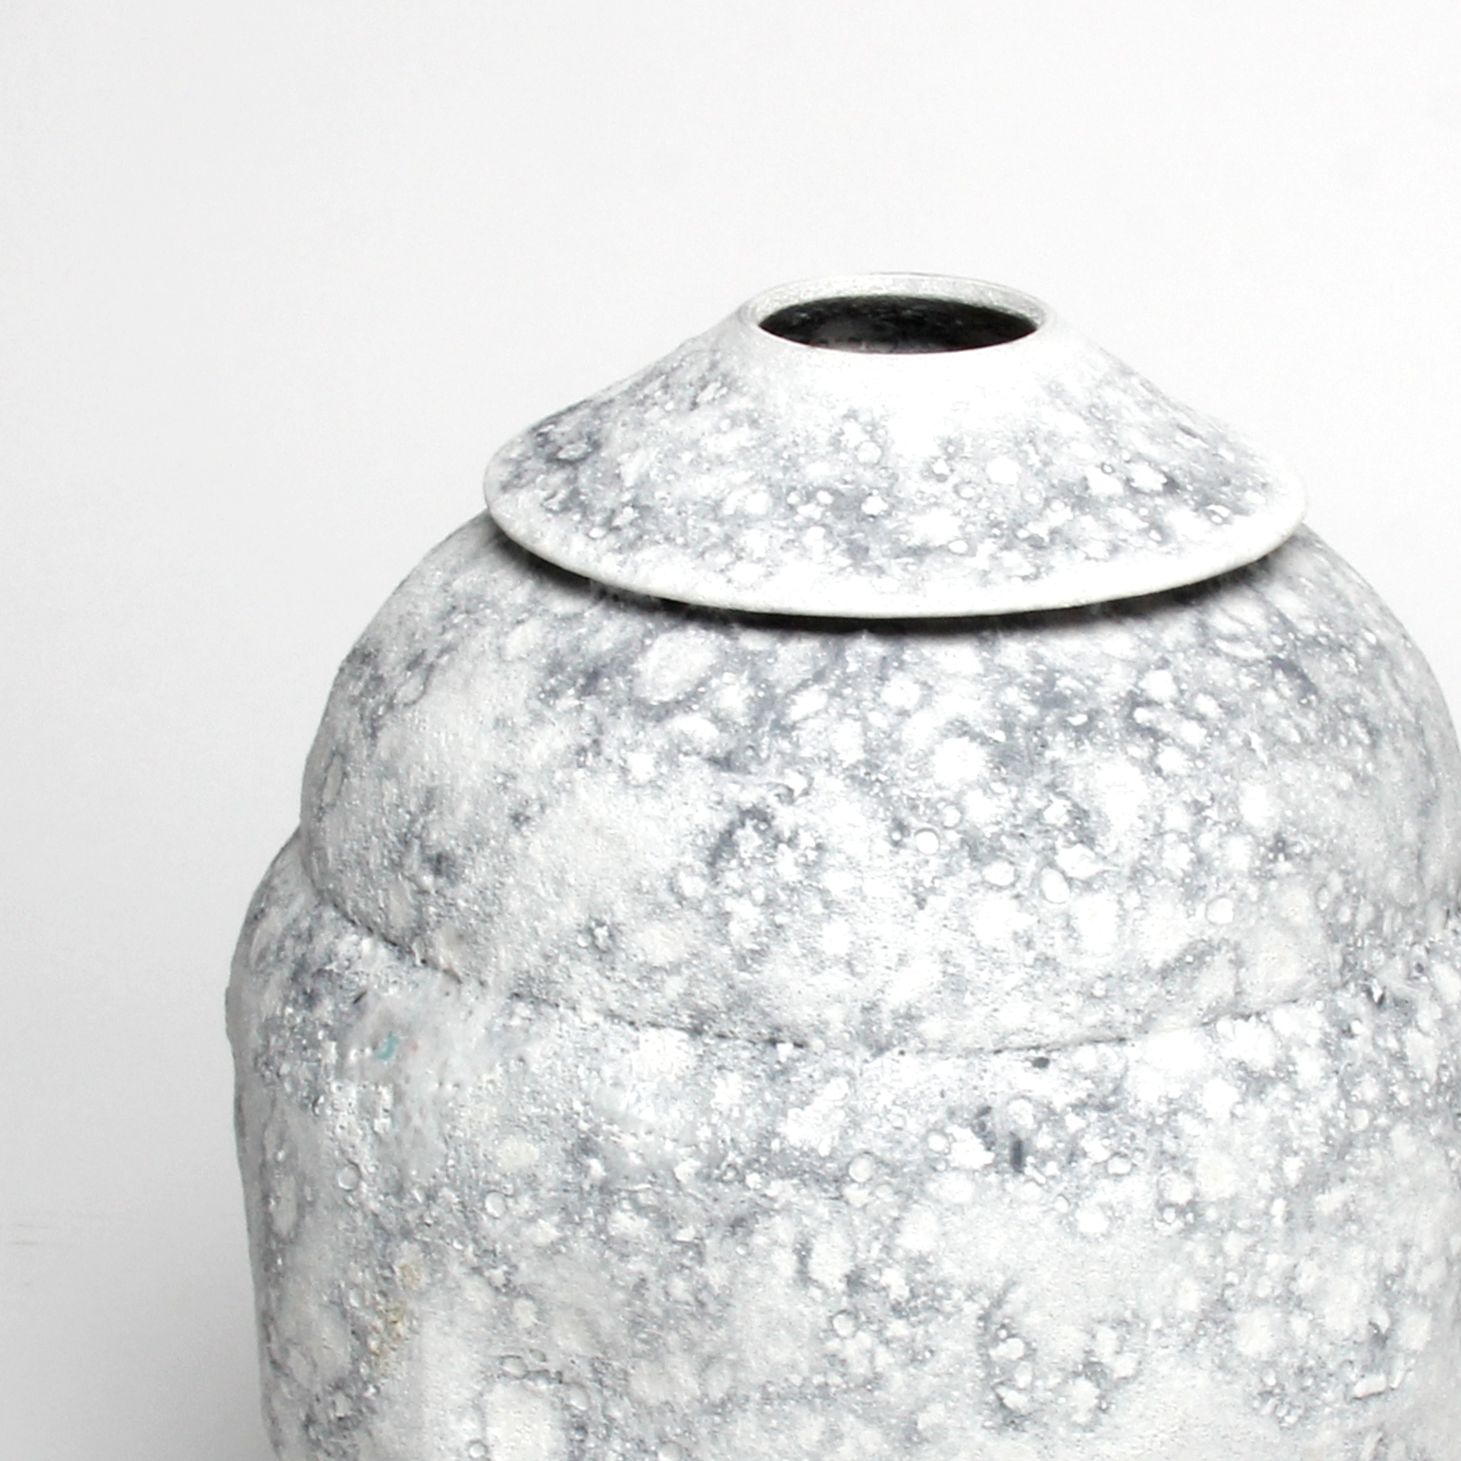 Kayo O’Young: Crater Vase Product Image 2 of 4